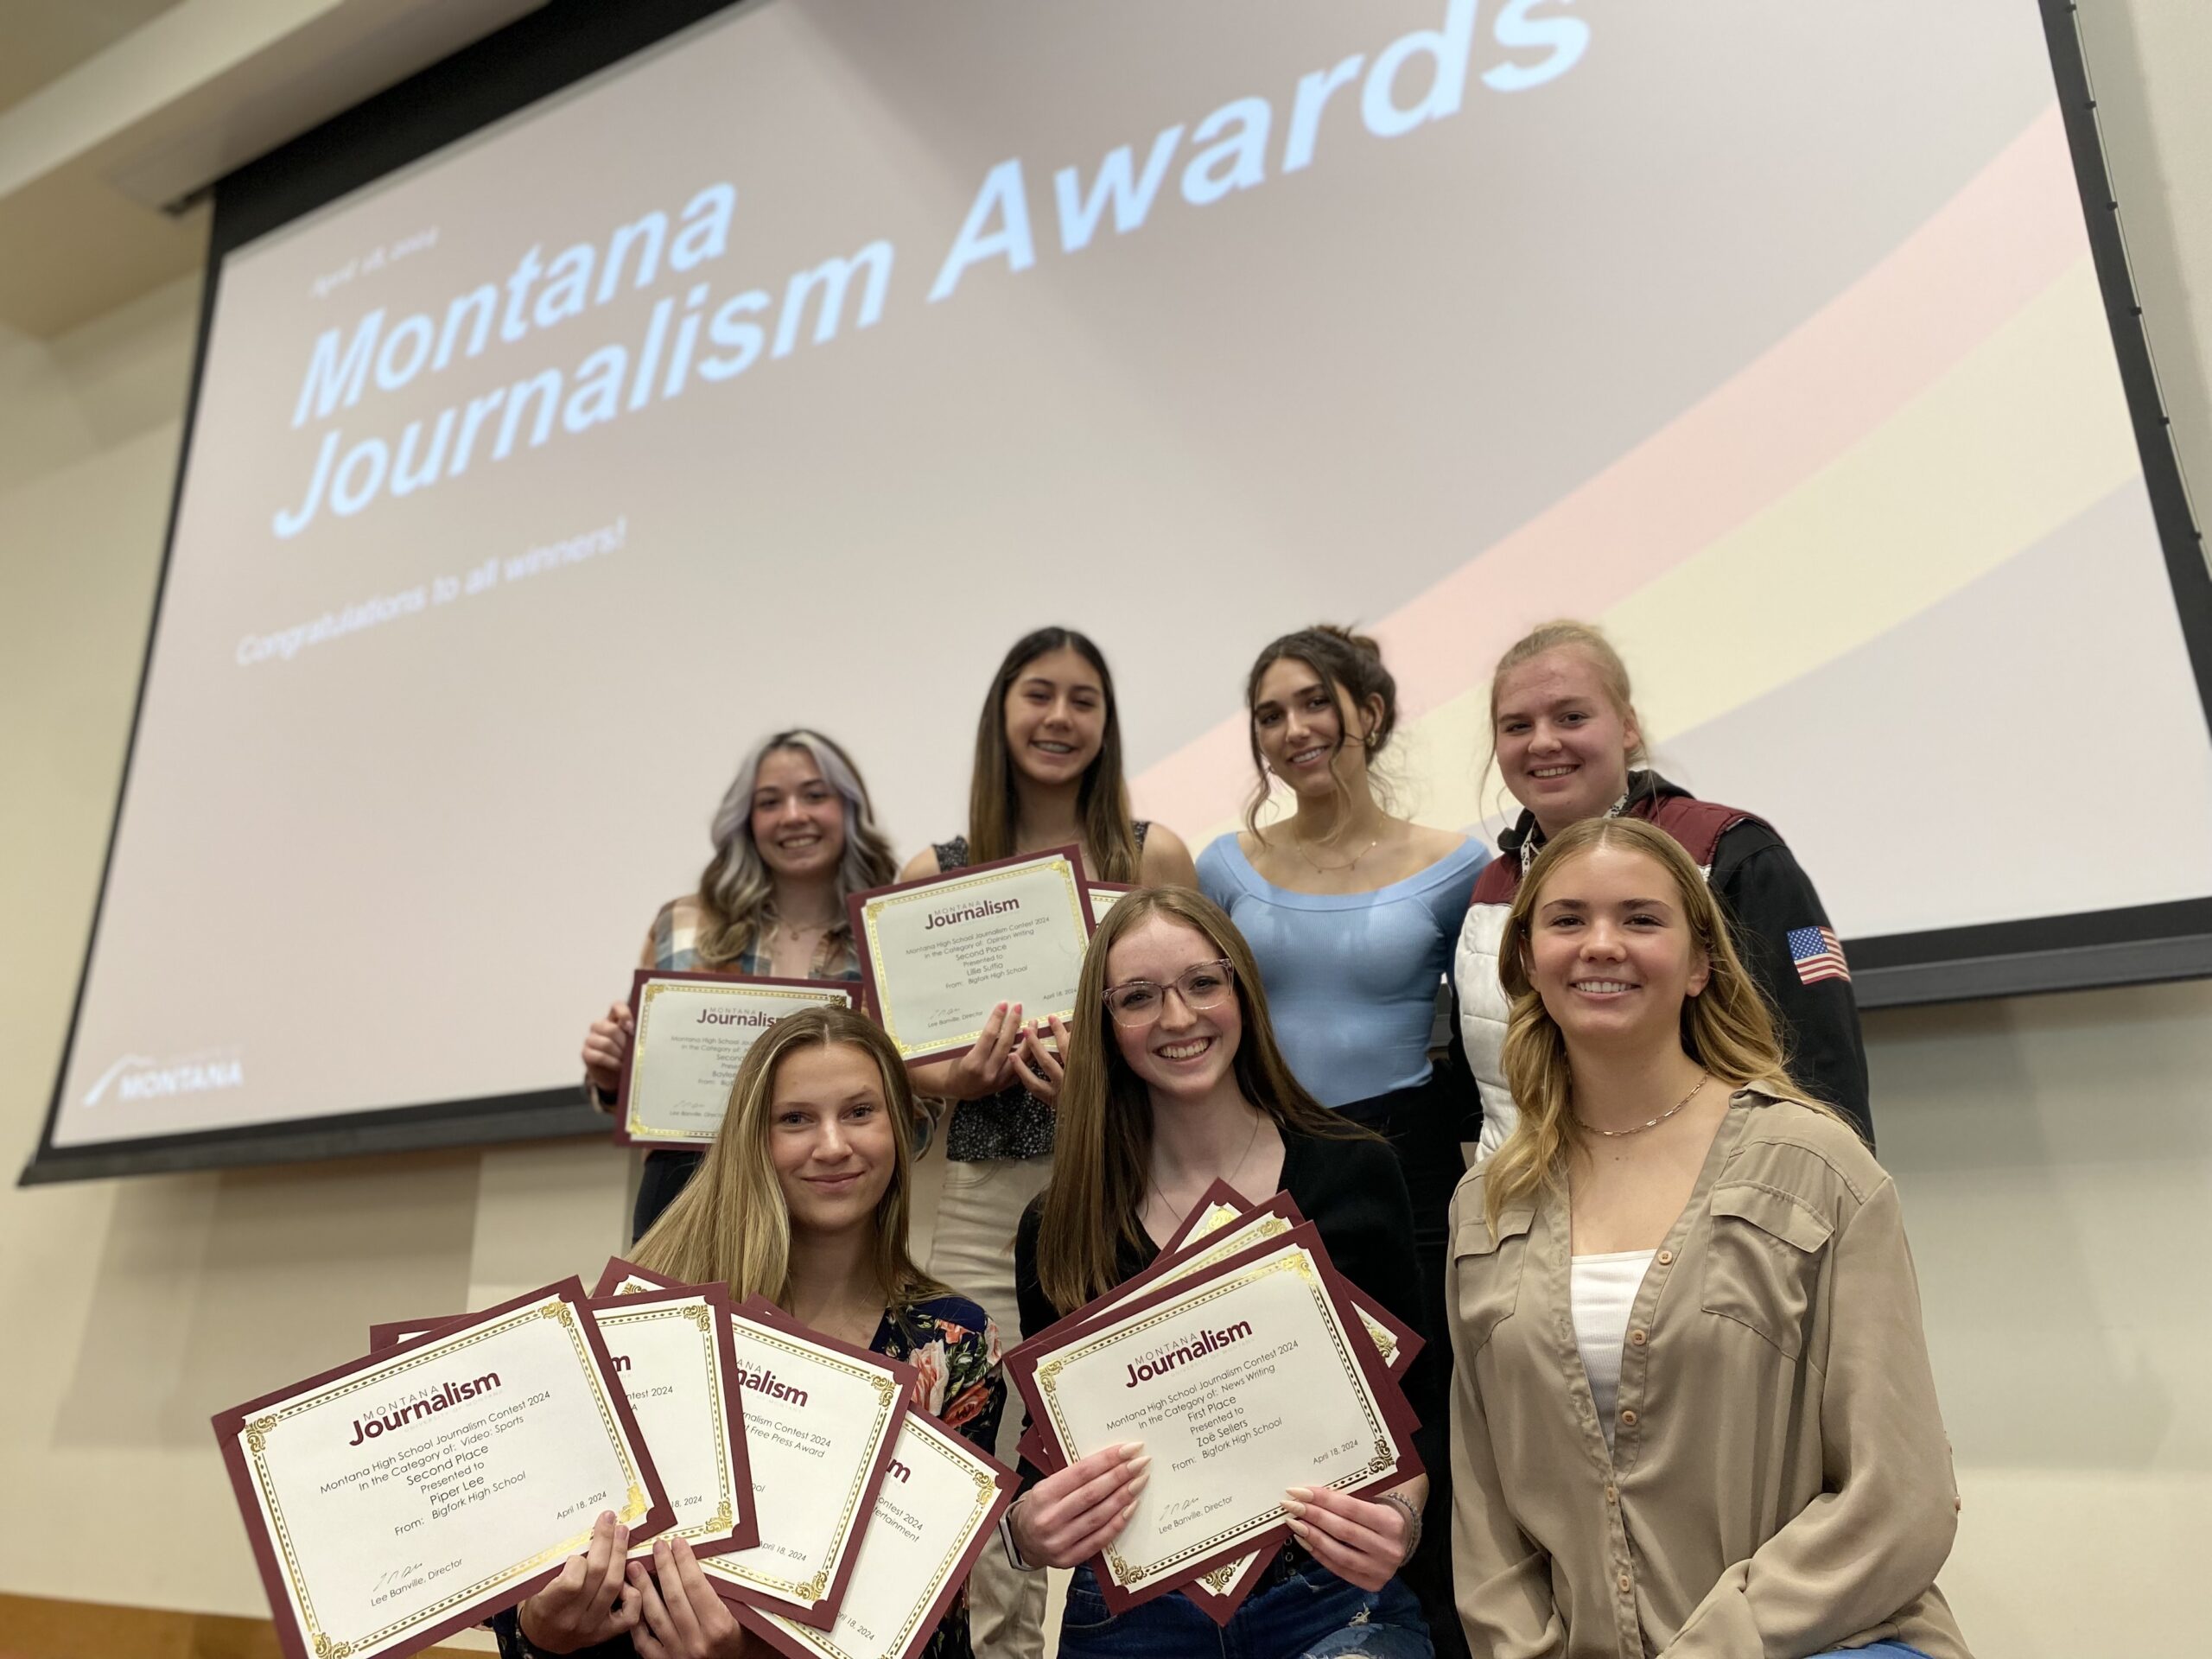 Journalism students holding their awards stand in front of presentation screen. 